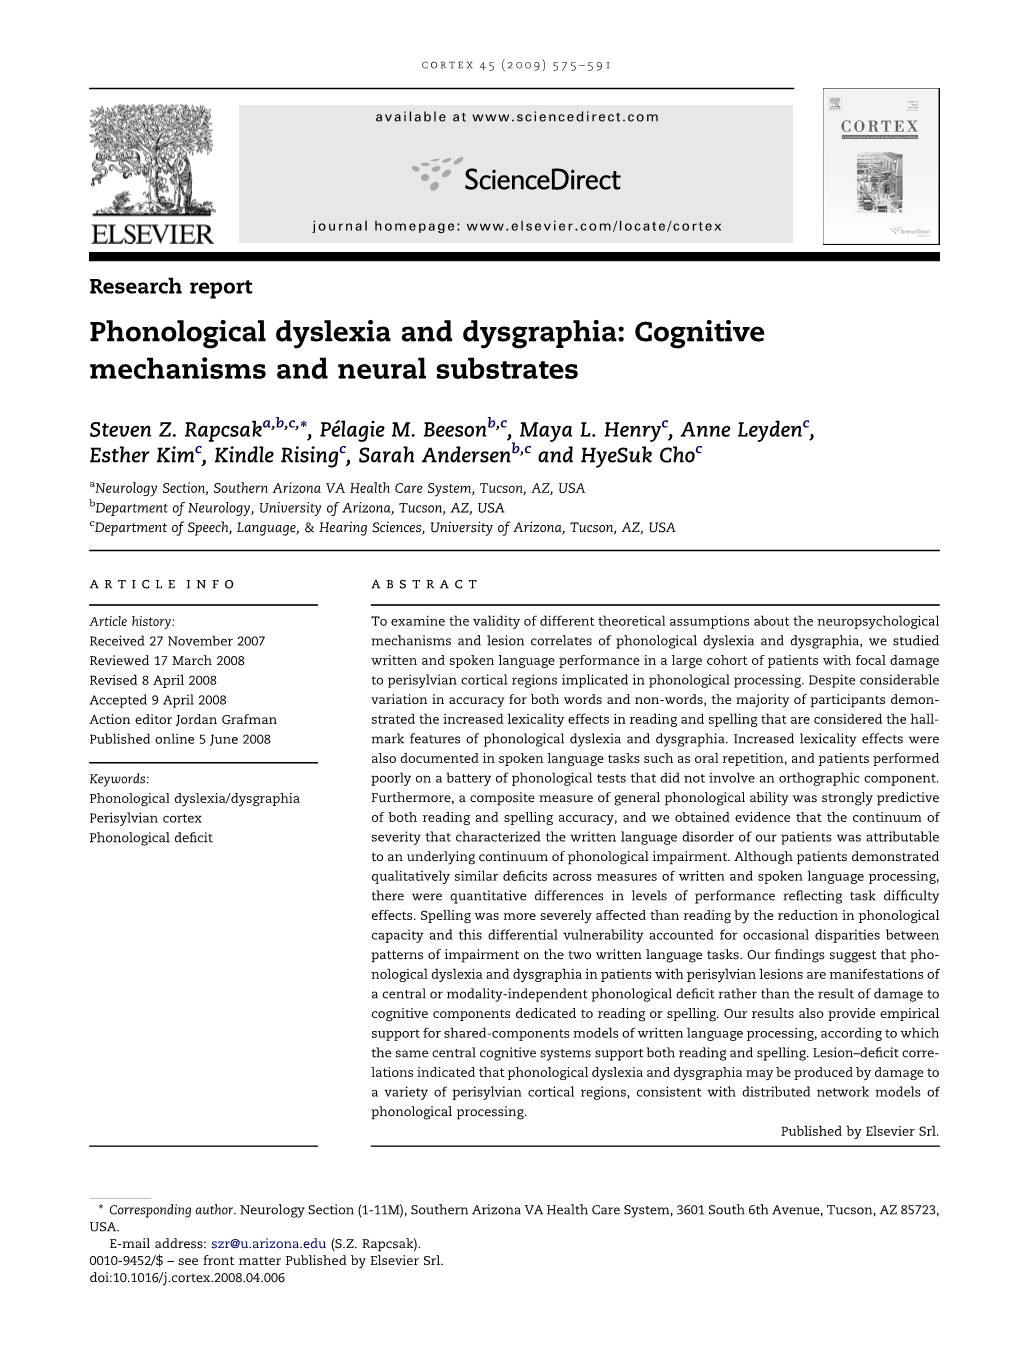 Phonological Dyslexia and Dysgraphia: Cognitive Mechanisms and Neural Substrates